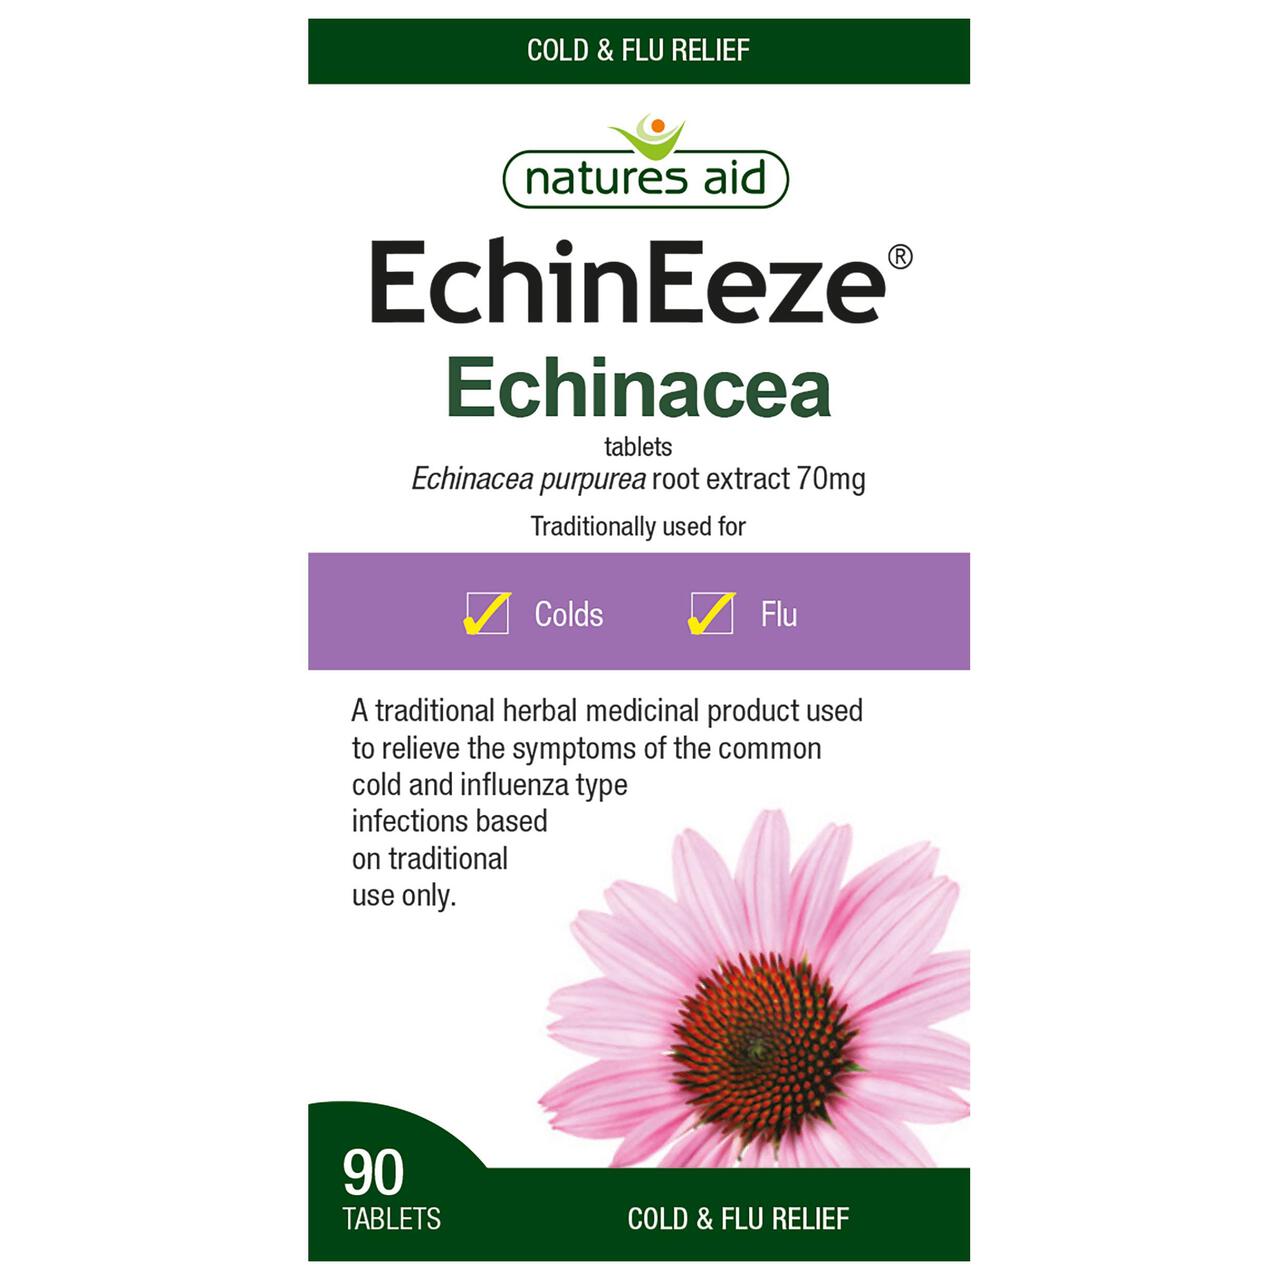 Natures Aid EchinEze Echinacea Tablets 70mg 90 per pack